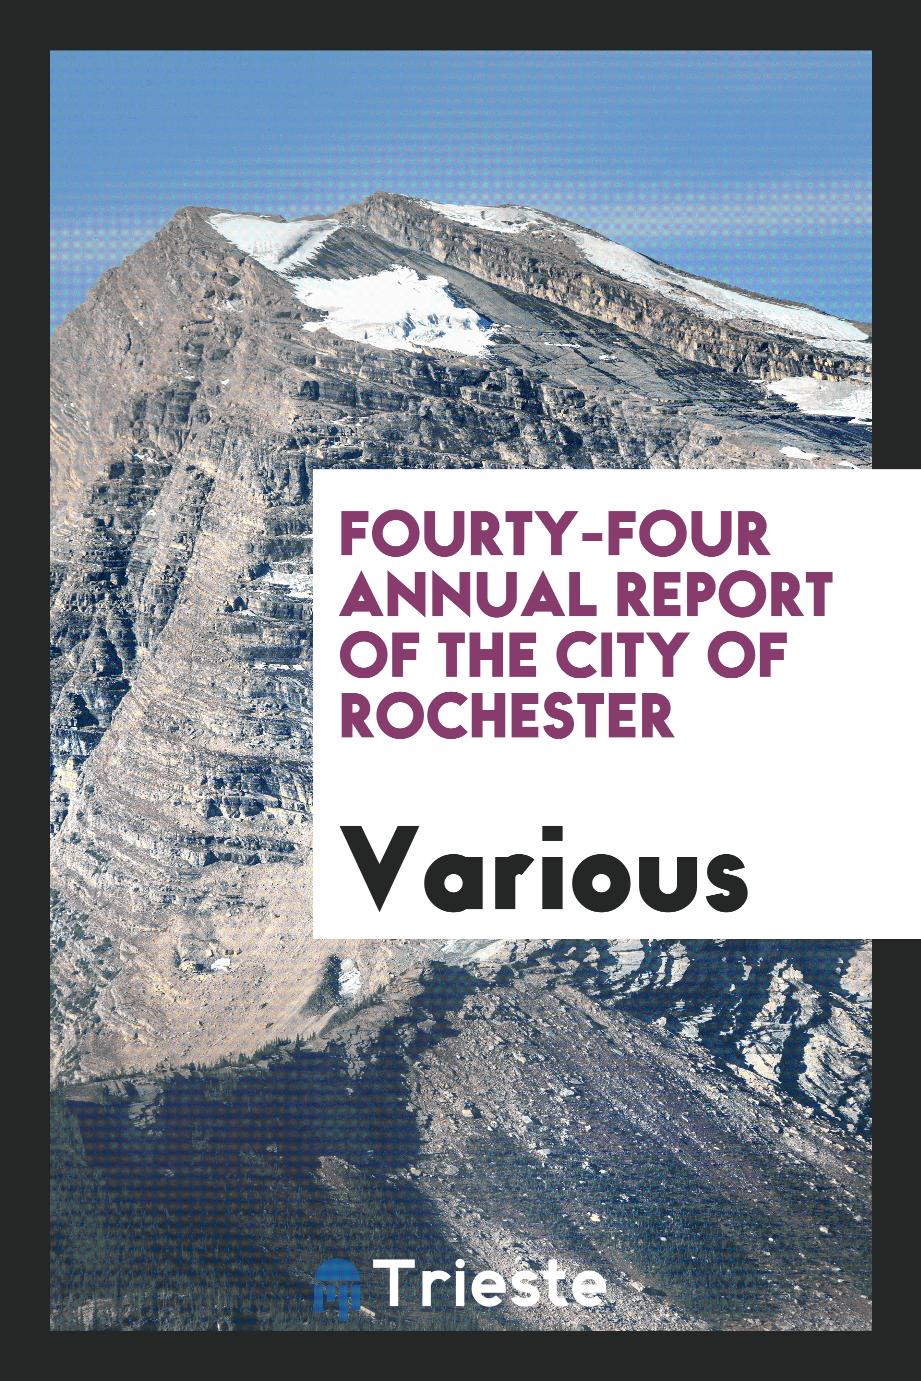 Fourty-four Annual report of the City of Rochester